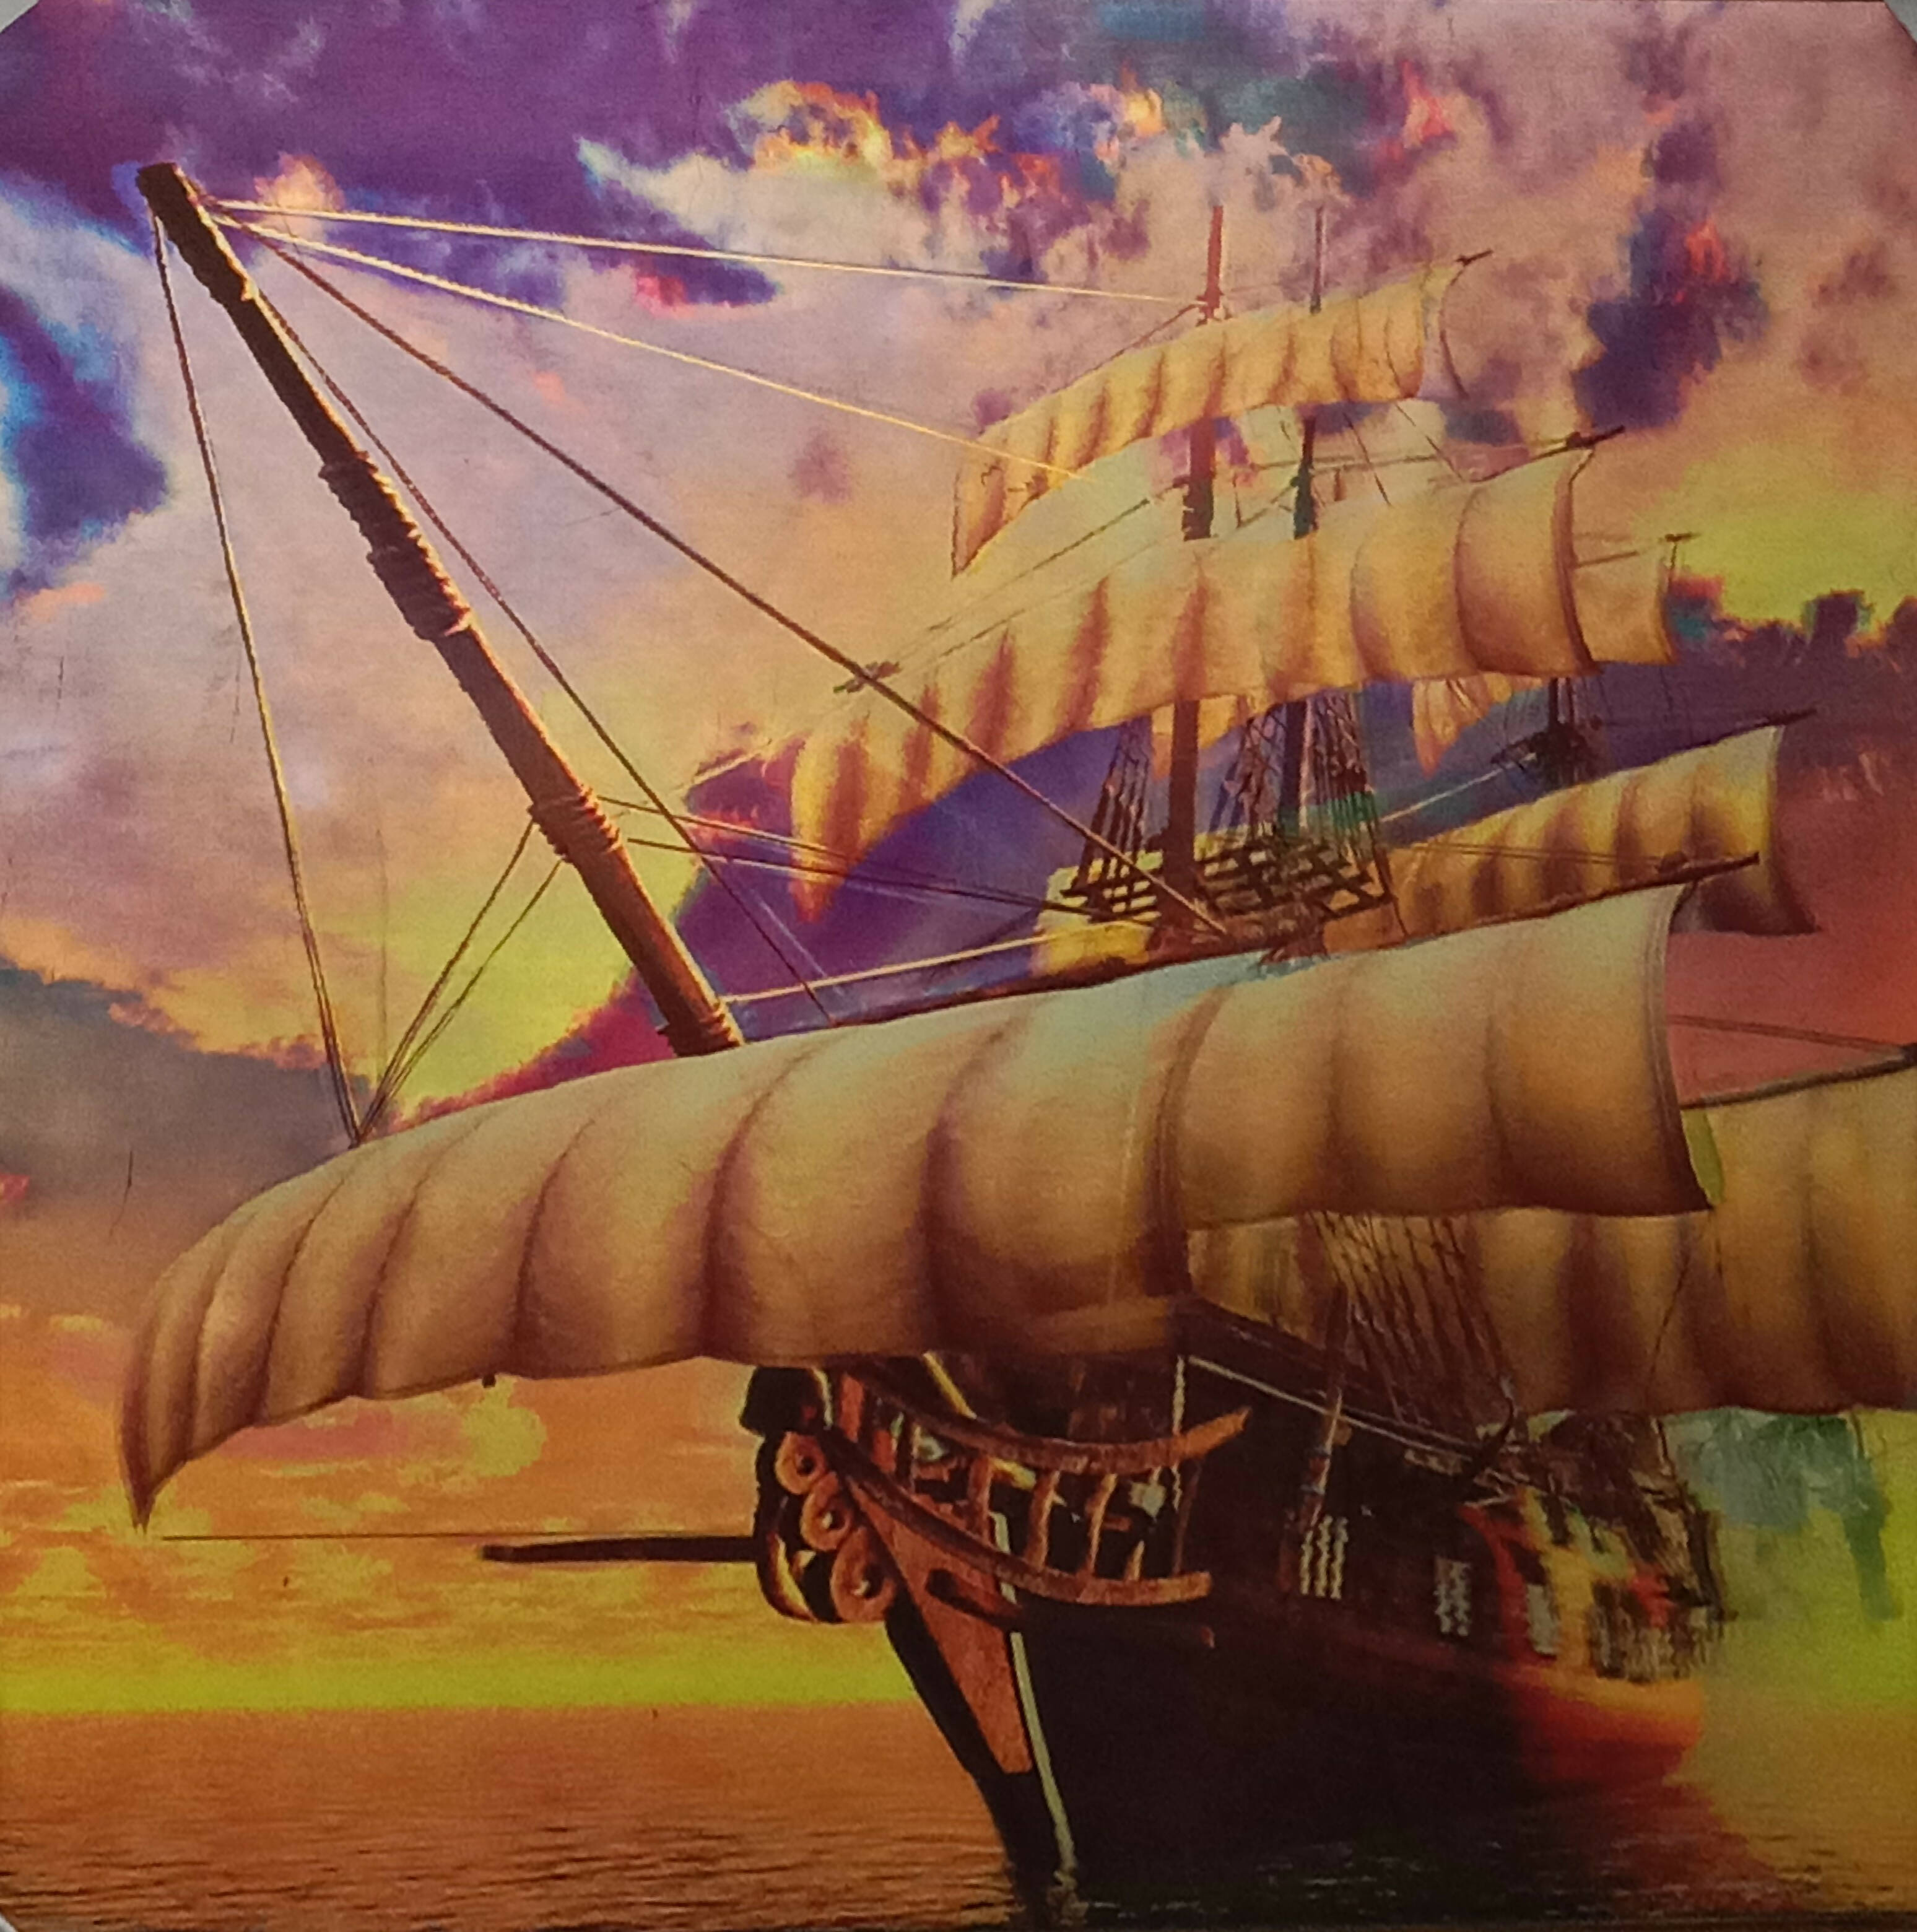 Painting of a Ship in the sea?